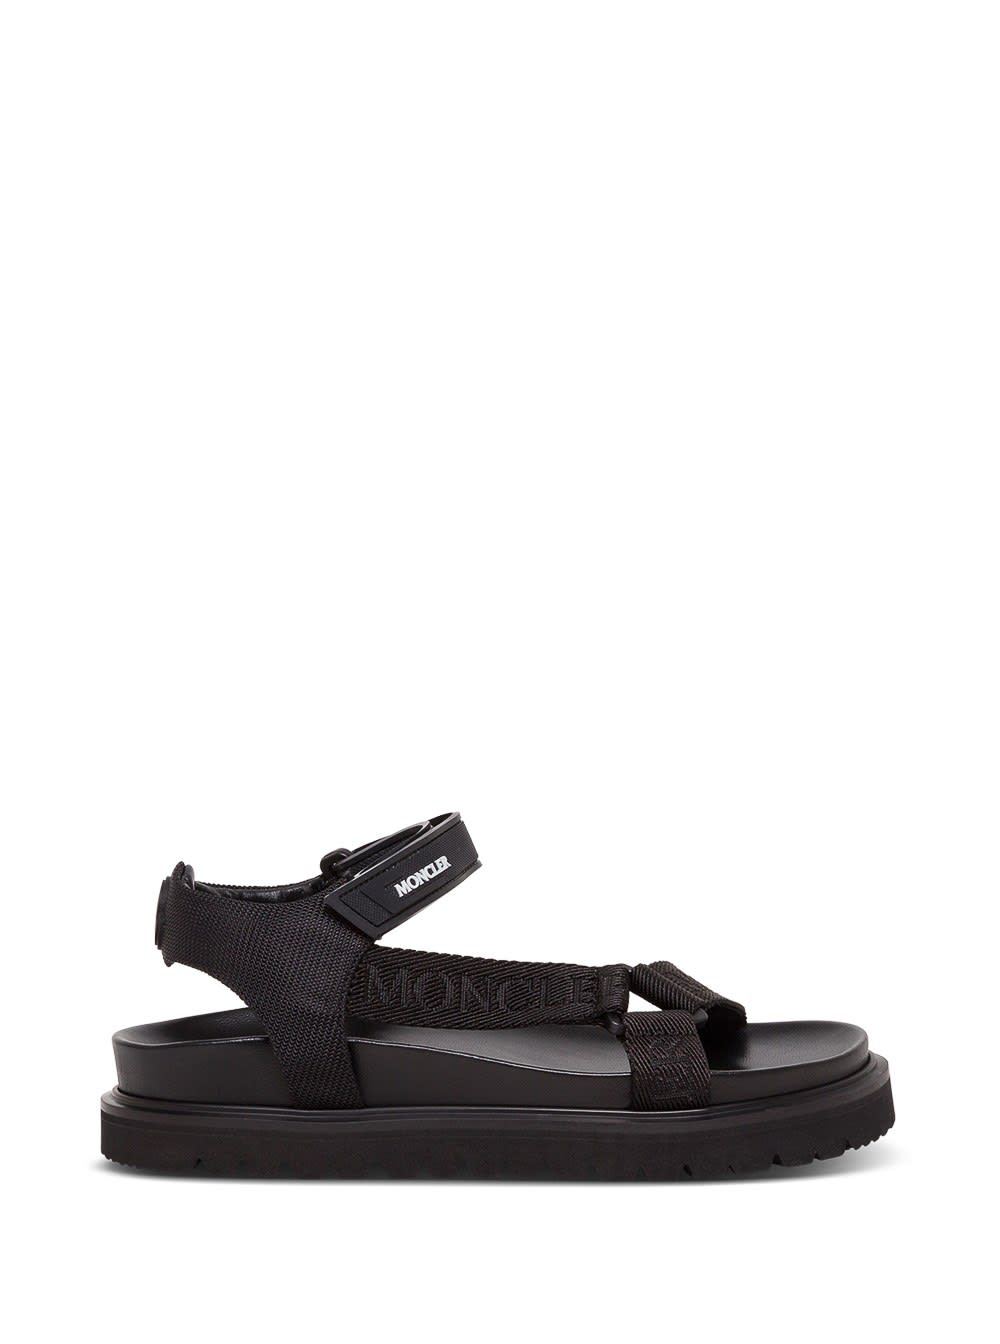 Moncler Flavia Black Sandals With Logo